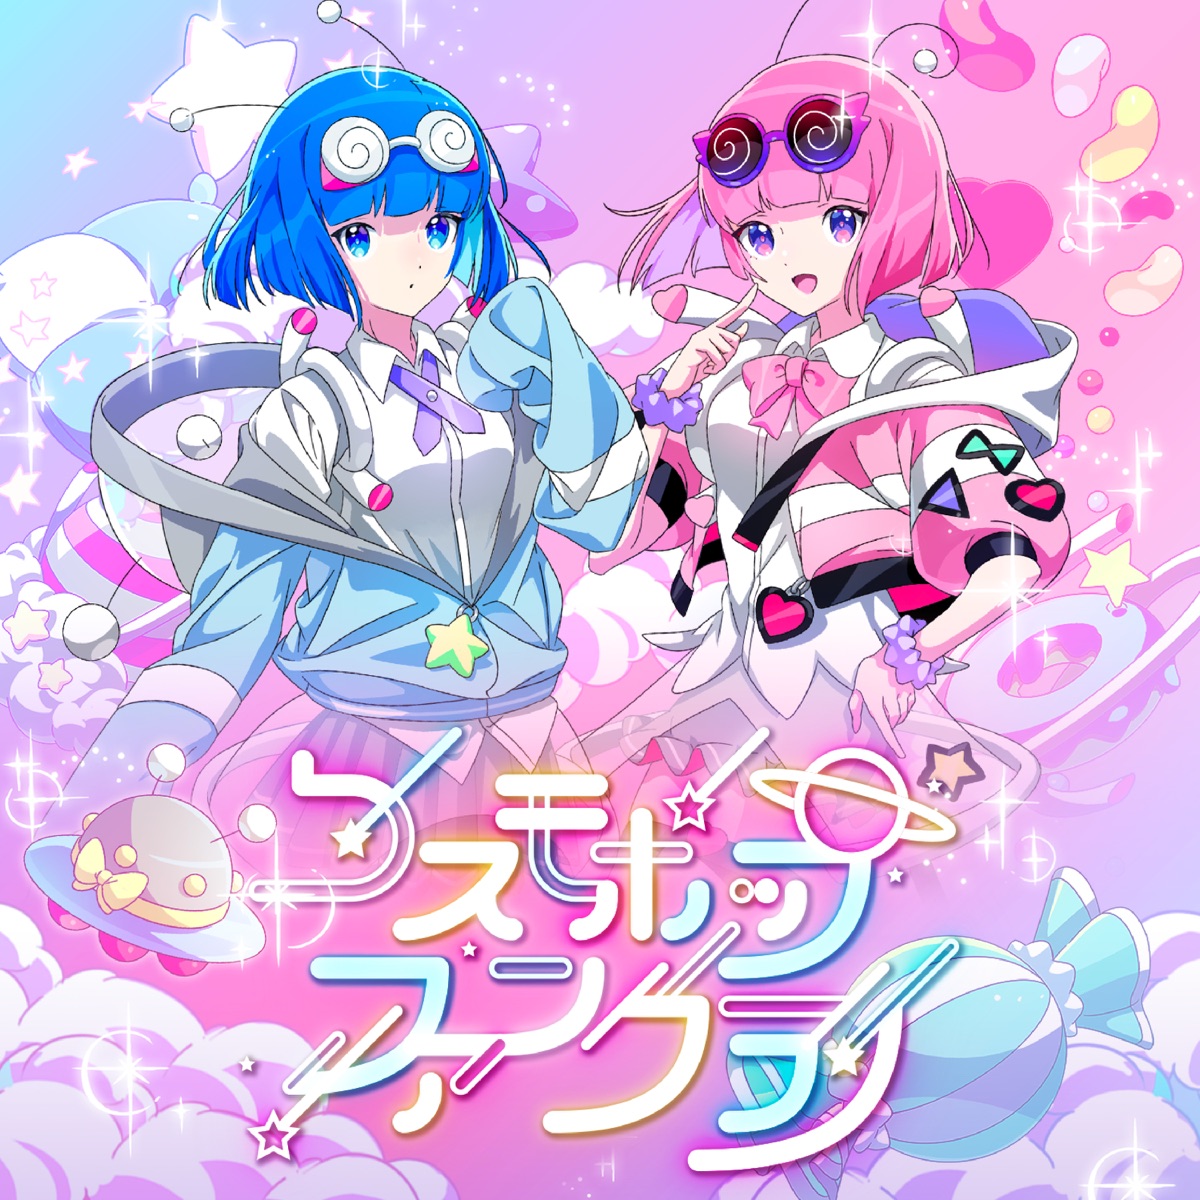 Cover art for『NayutalieN - コスモポップファンクラブ (feat. 000, ナナヲアカリ)』from the release『Cosmo Pop Funclub (feat. 000, Nanawo Akari)